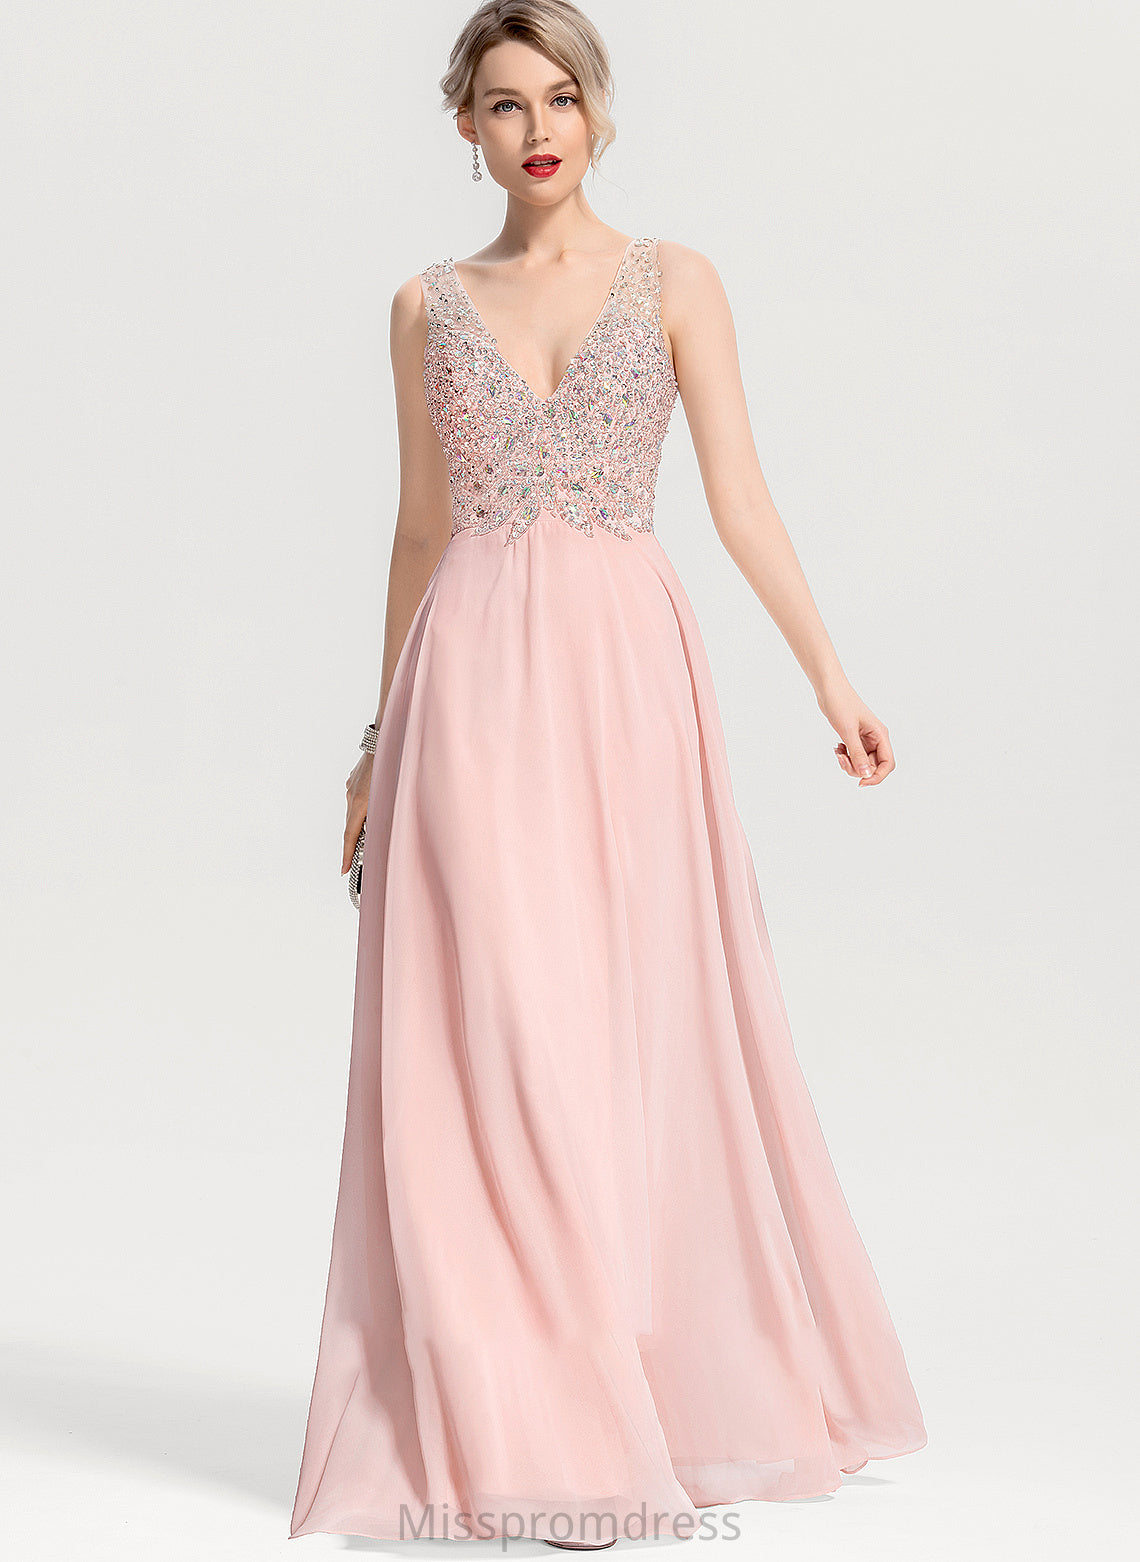 Chiffon Lainey Front A-Line Beading Prom Dresses Split V-neck Sequins Floor-Length With